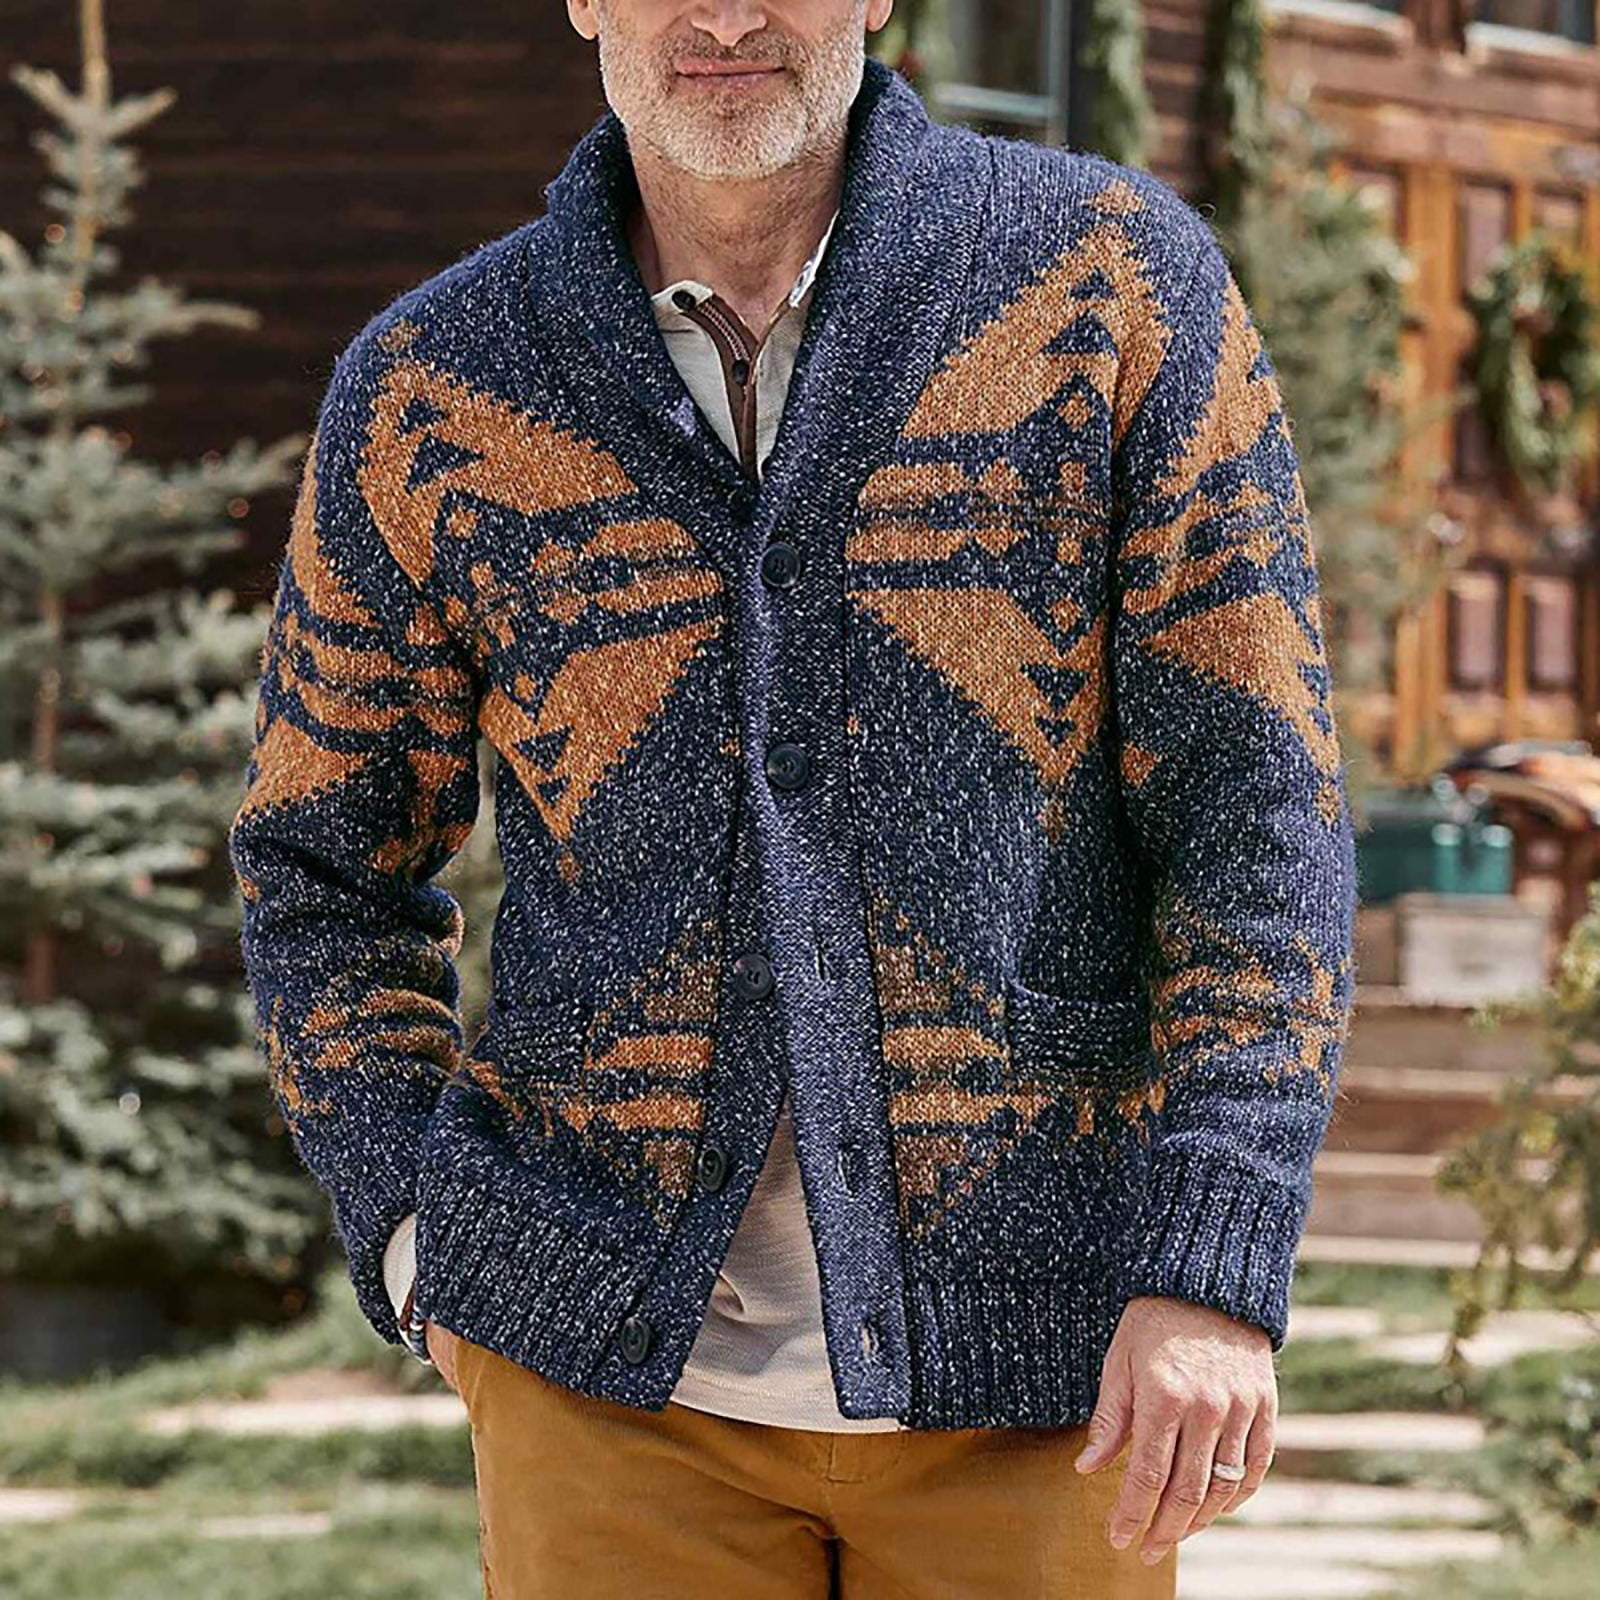 Men's Western Ethnic Aztec Cardigan Sweater Retro Shawl Collar Button Up  Knitwear Coat with Pockets 